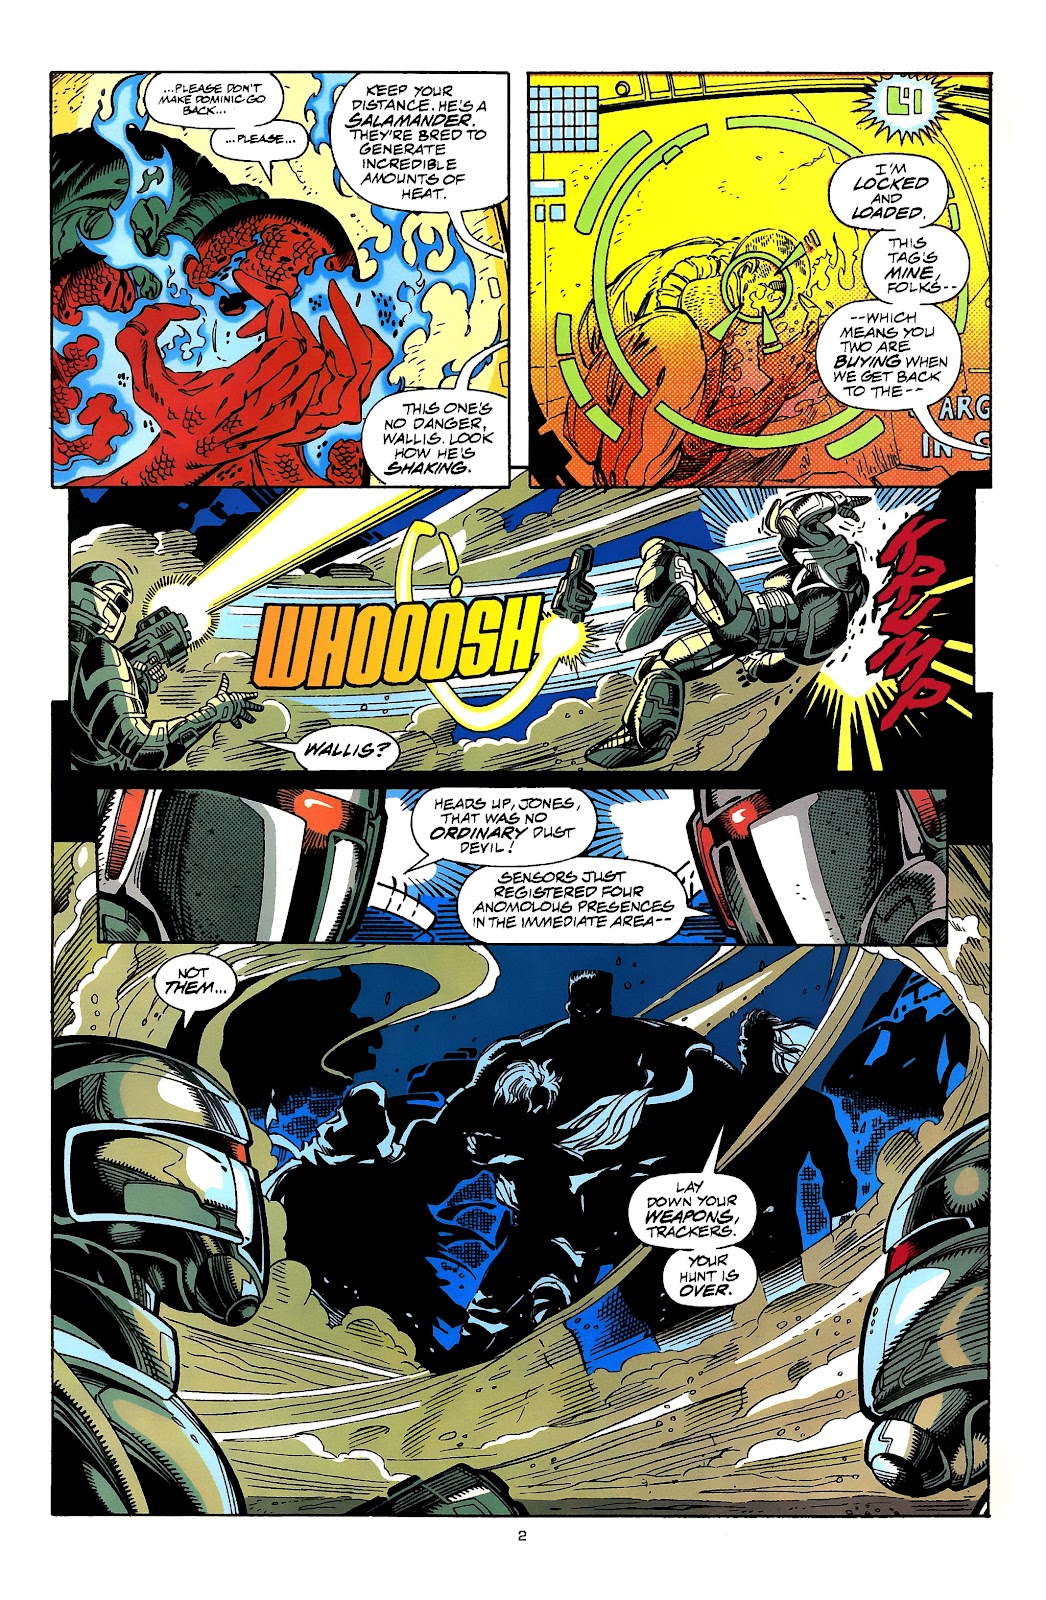 X-Men 2099 issue 6 - Page 3